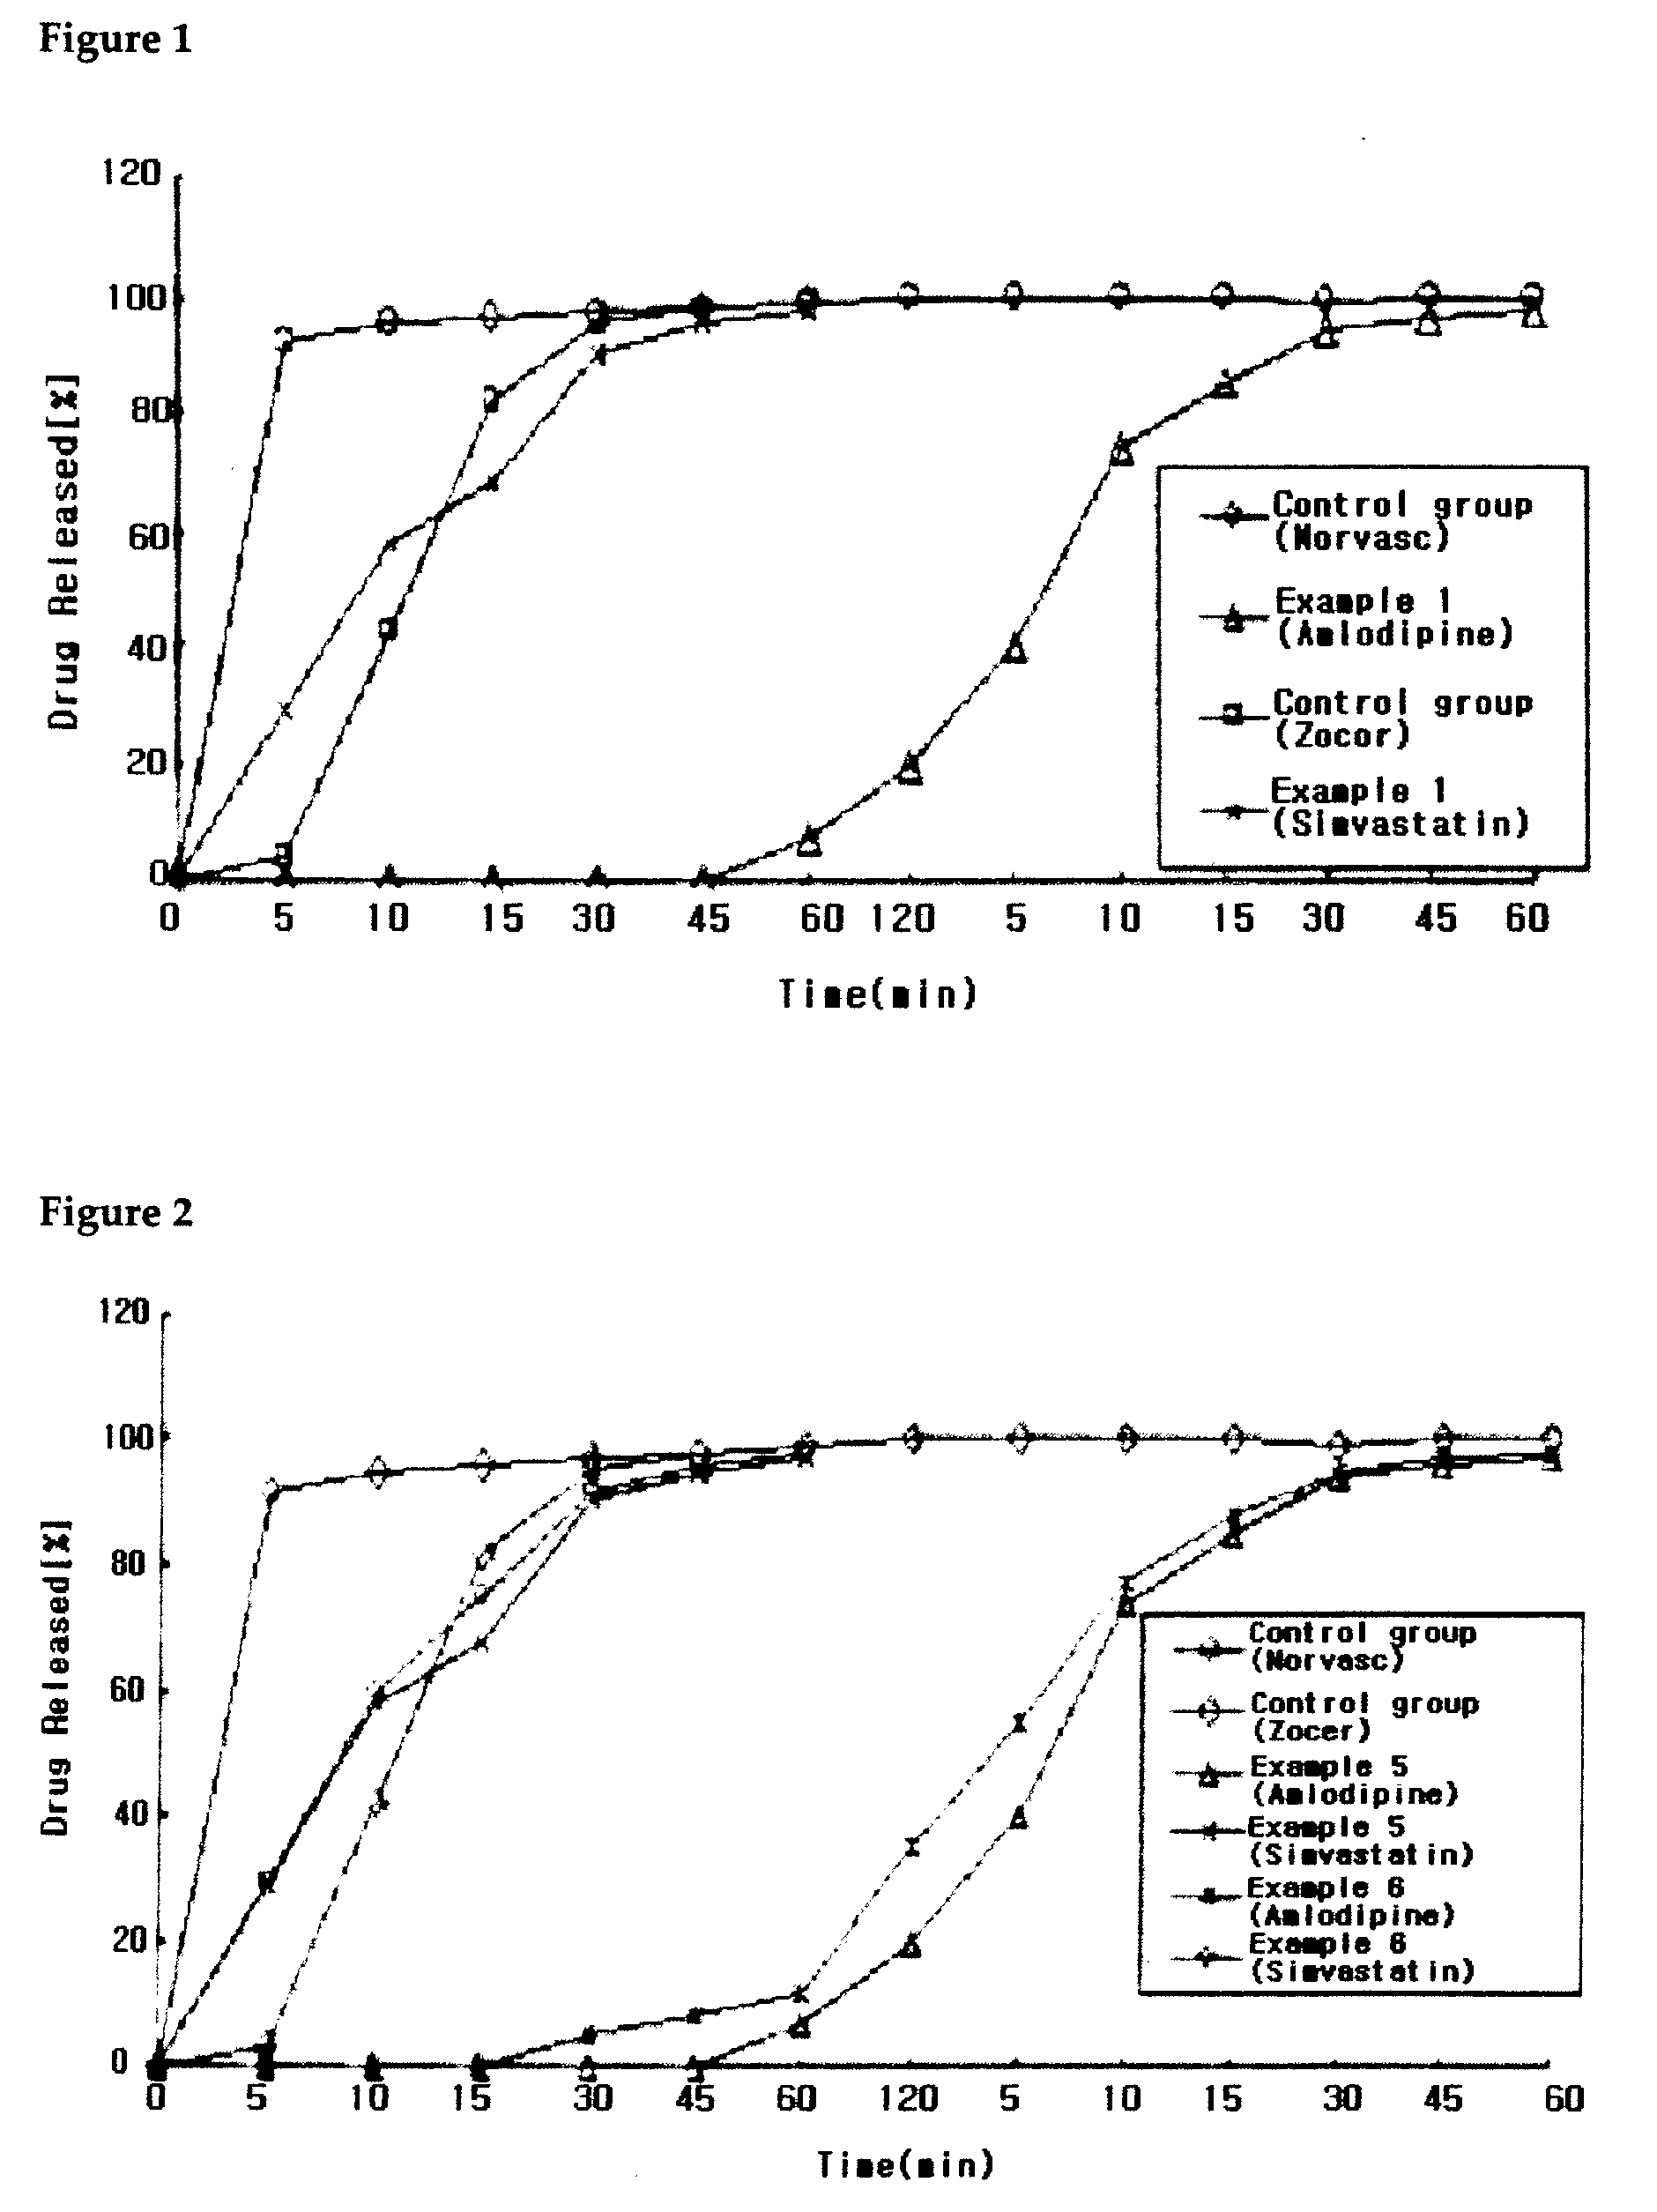 Combined Pharmaceutical Formulation with Controlled-Release Comprising Dihydropyridine Calcium Channel Blockers and HMG-COA Reductase Inhibitors